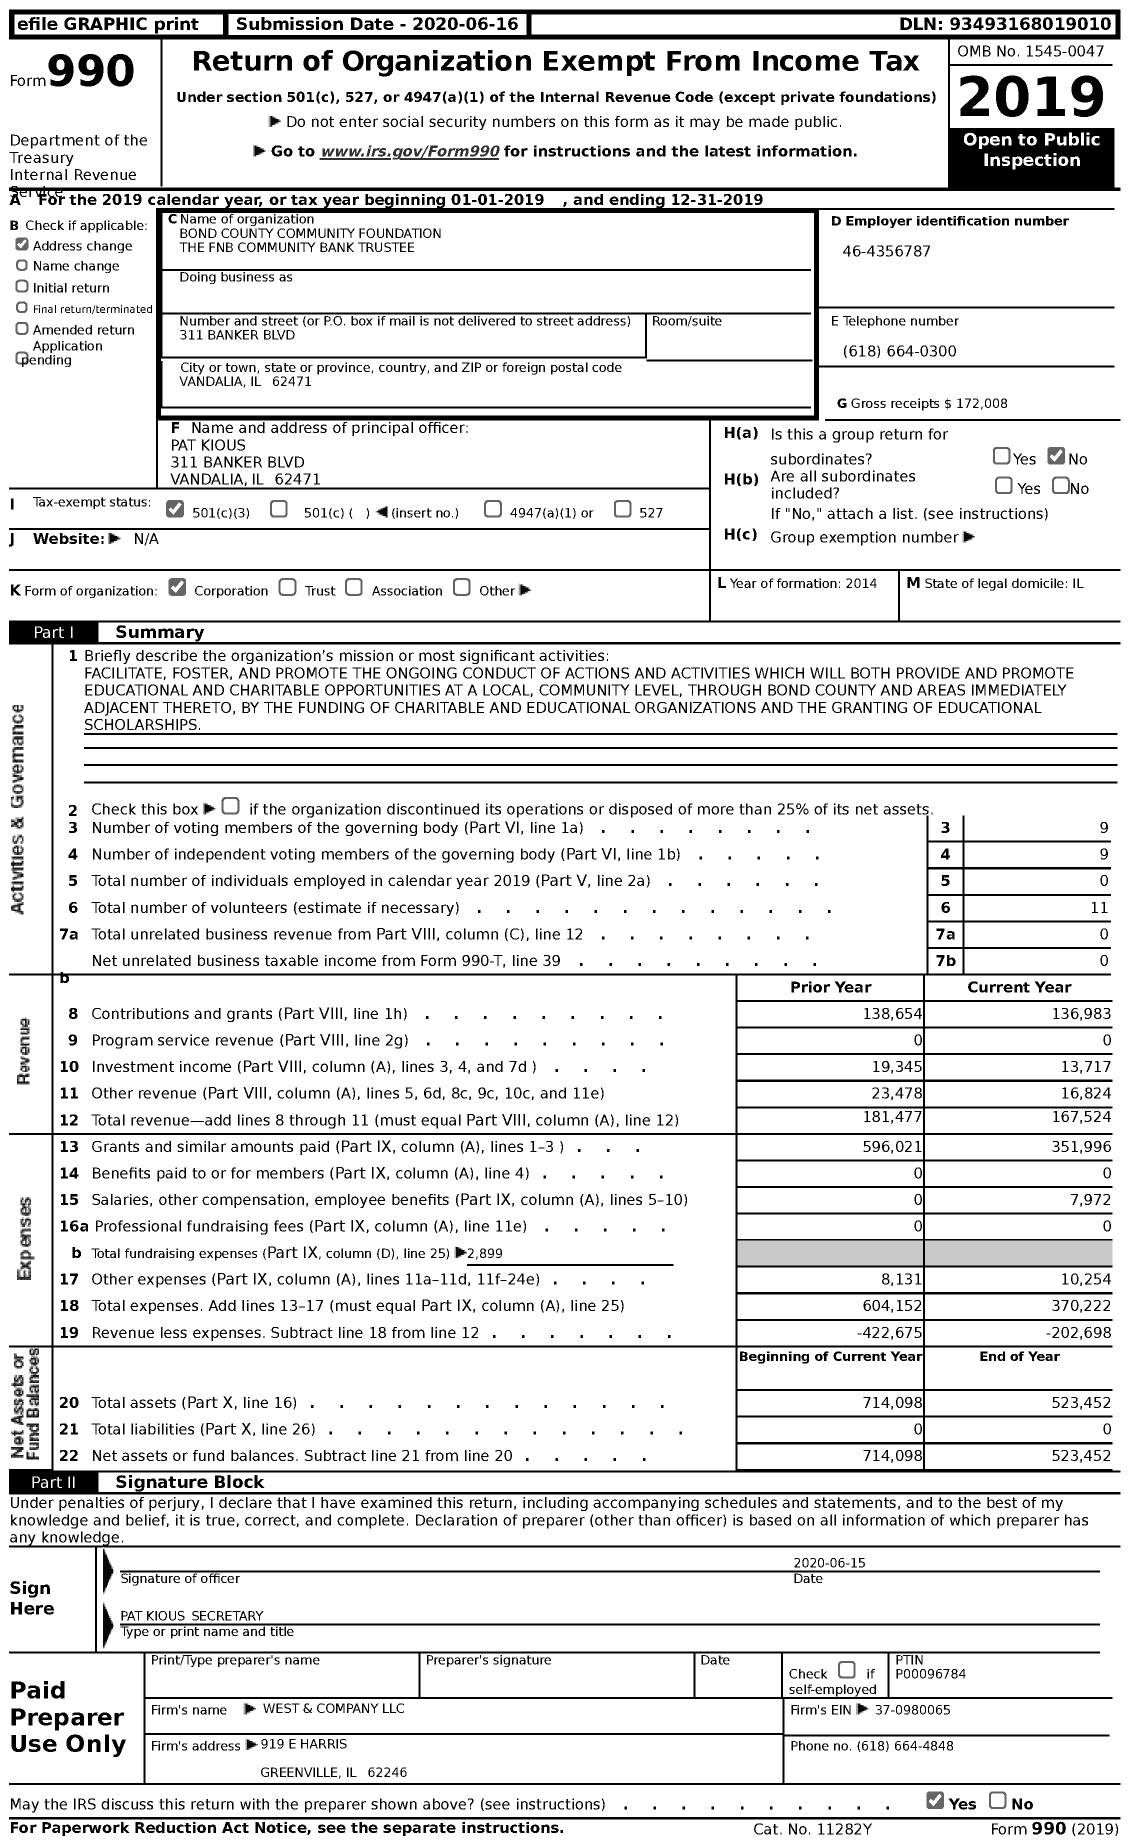 Image of first page of 2019 Form 990 for Bond County Community Foundation the FNB Community Bank Trustee